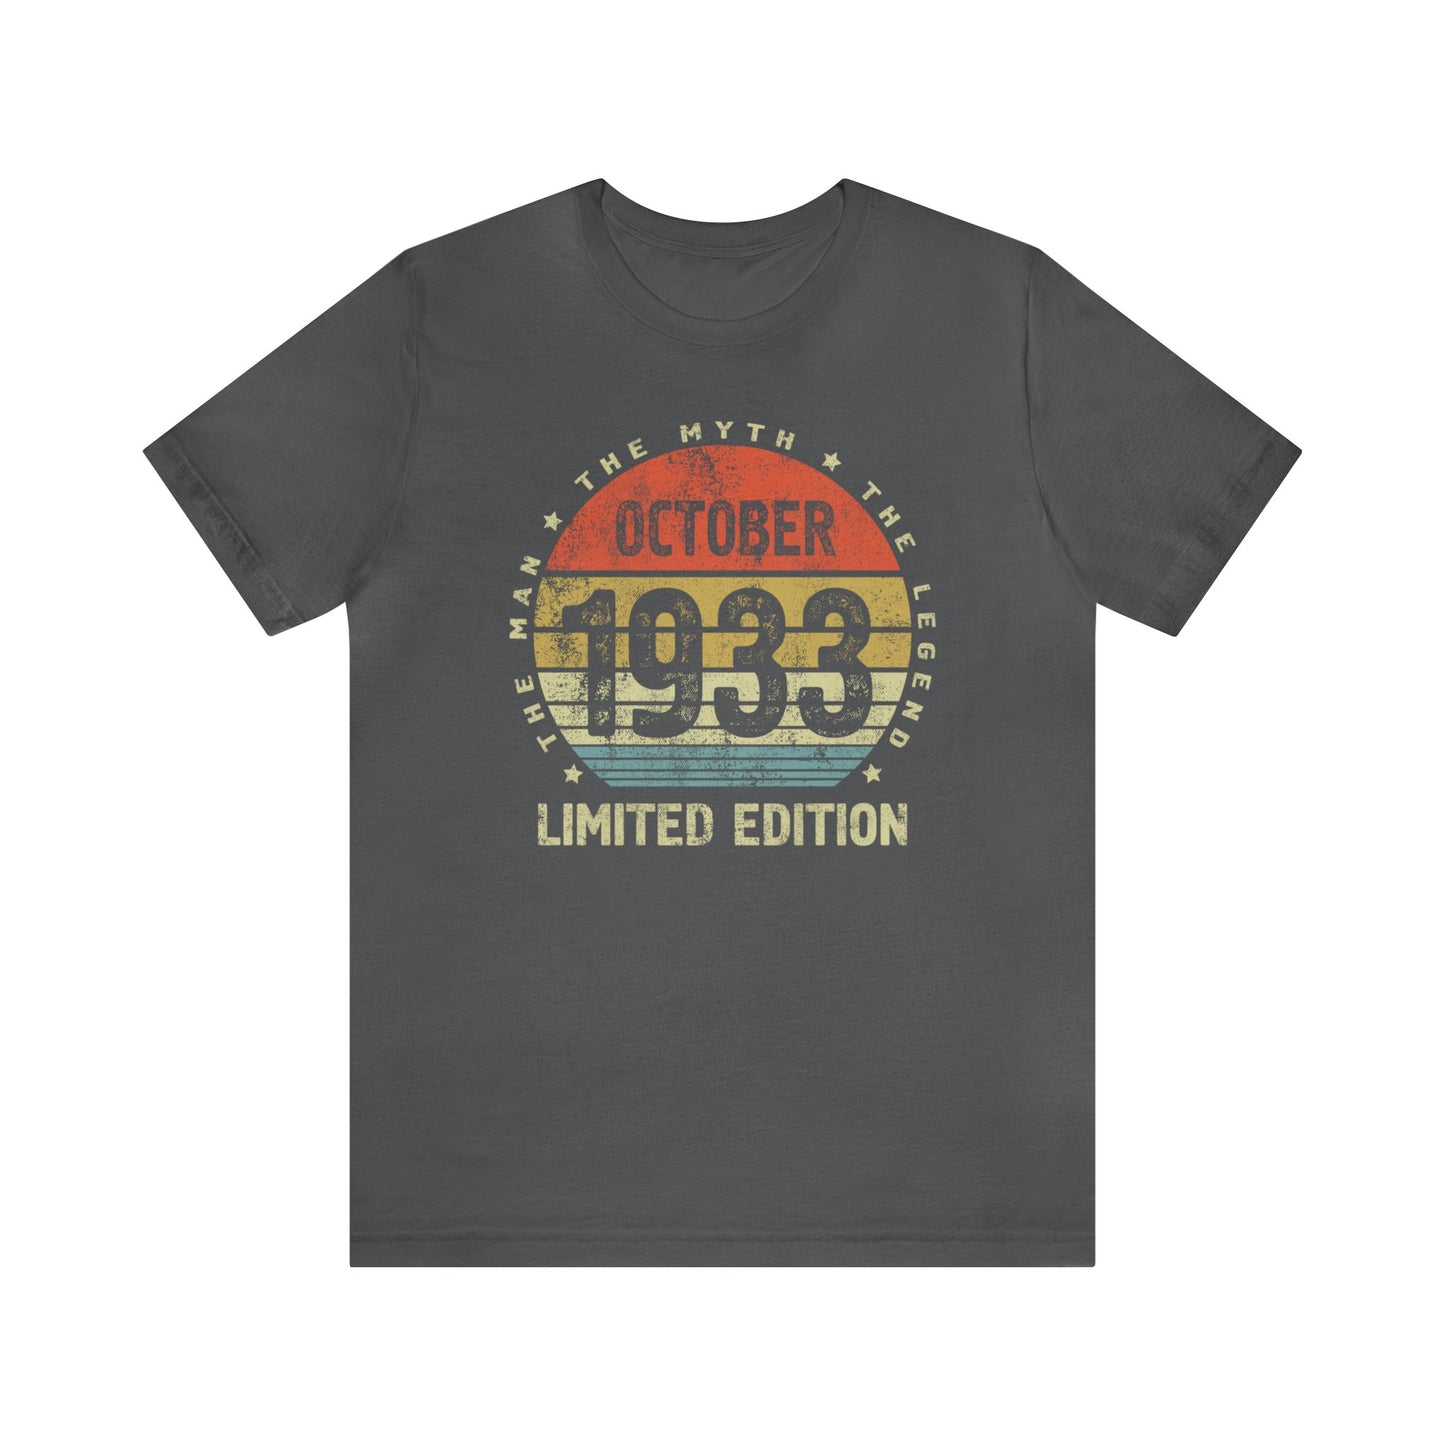 90th birthday gift shirt for men October 1933 birthday gift for husband 90 anniversary Shirt for dad